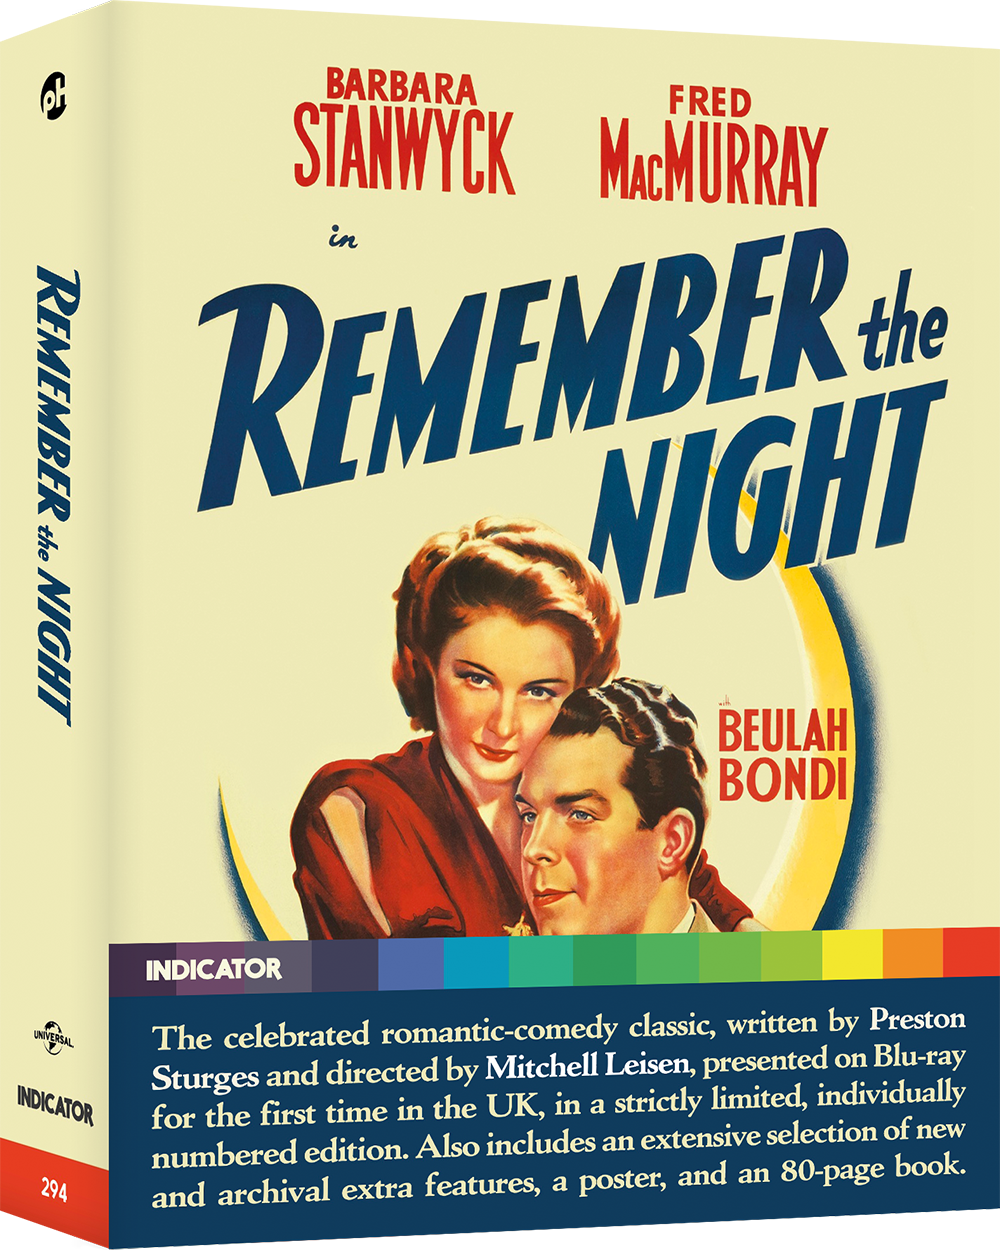 REMEMBER THE NIGHT - LE